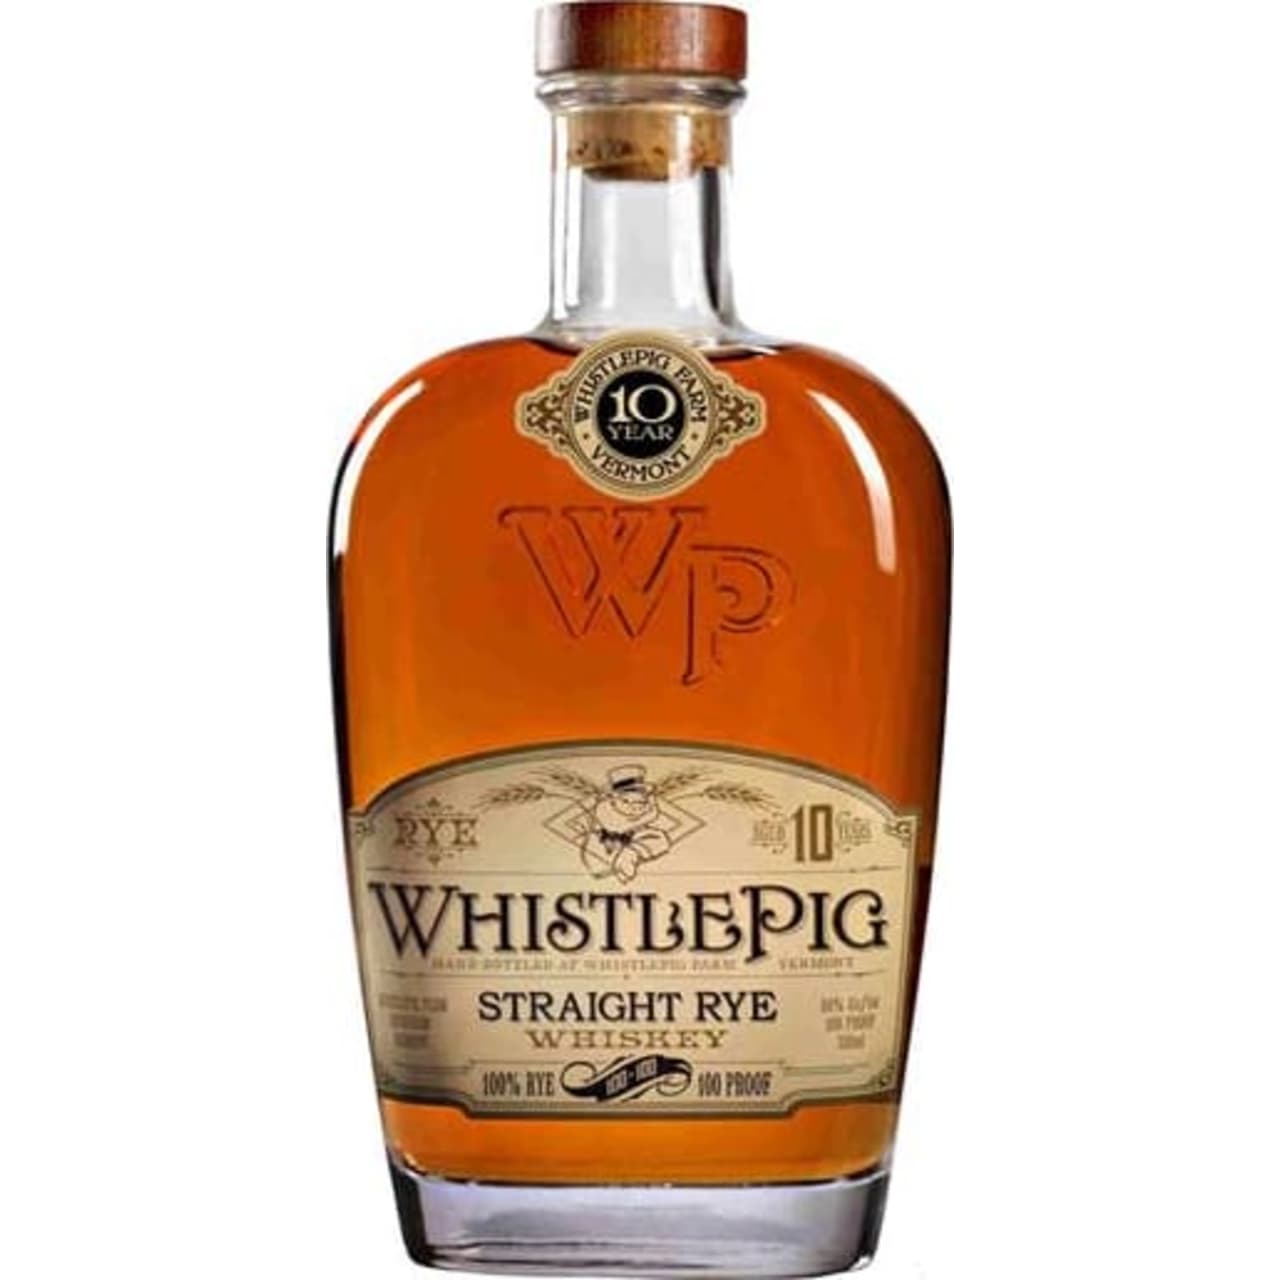 Aged anew in American oak at WhistlePig's Vermont farm, before being hand-bottled on-site, it encapsulates the spirit of WhistlePig: bold and fearless in its pursuit of new rye whiskey hights.